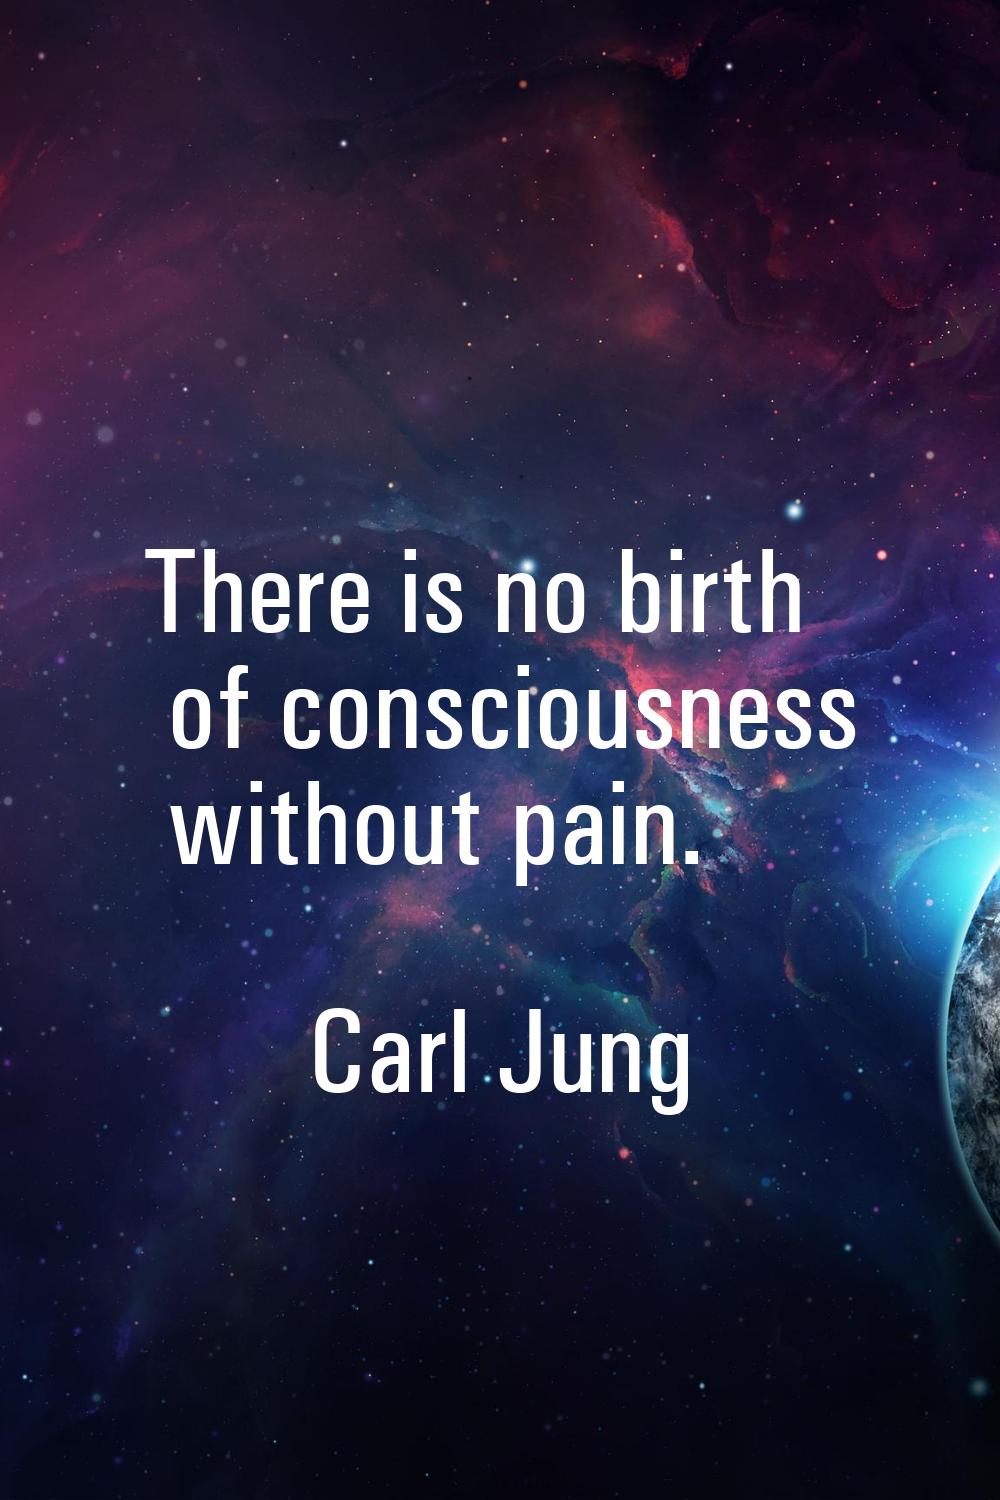 There is no birth of consciousness without pain.